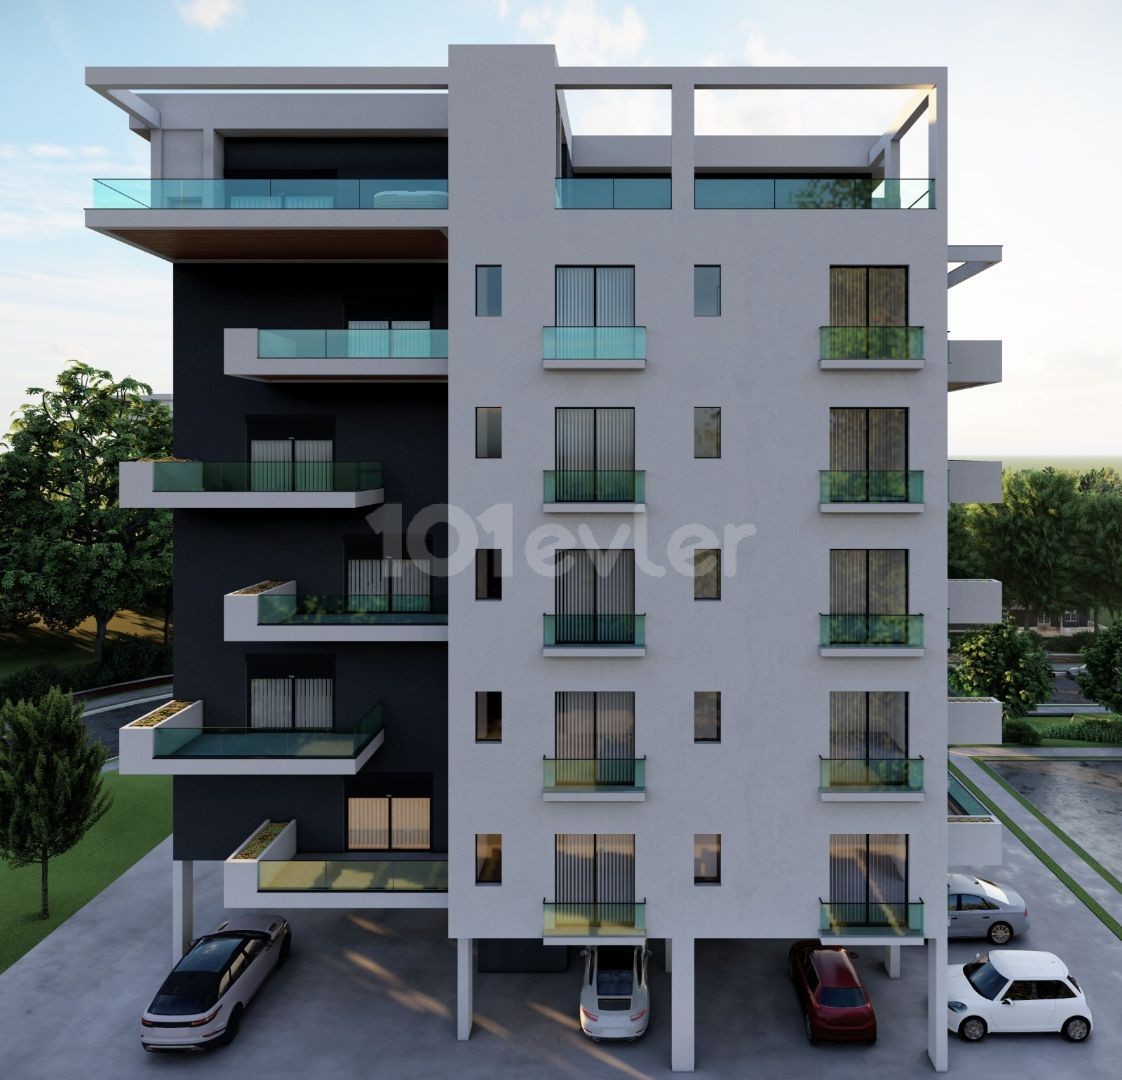 2+1 Flats for Sale in the Nicosia Beach Area from the Project